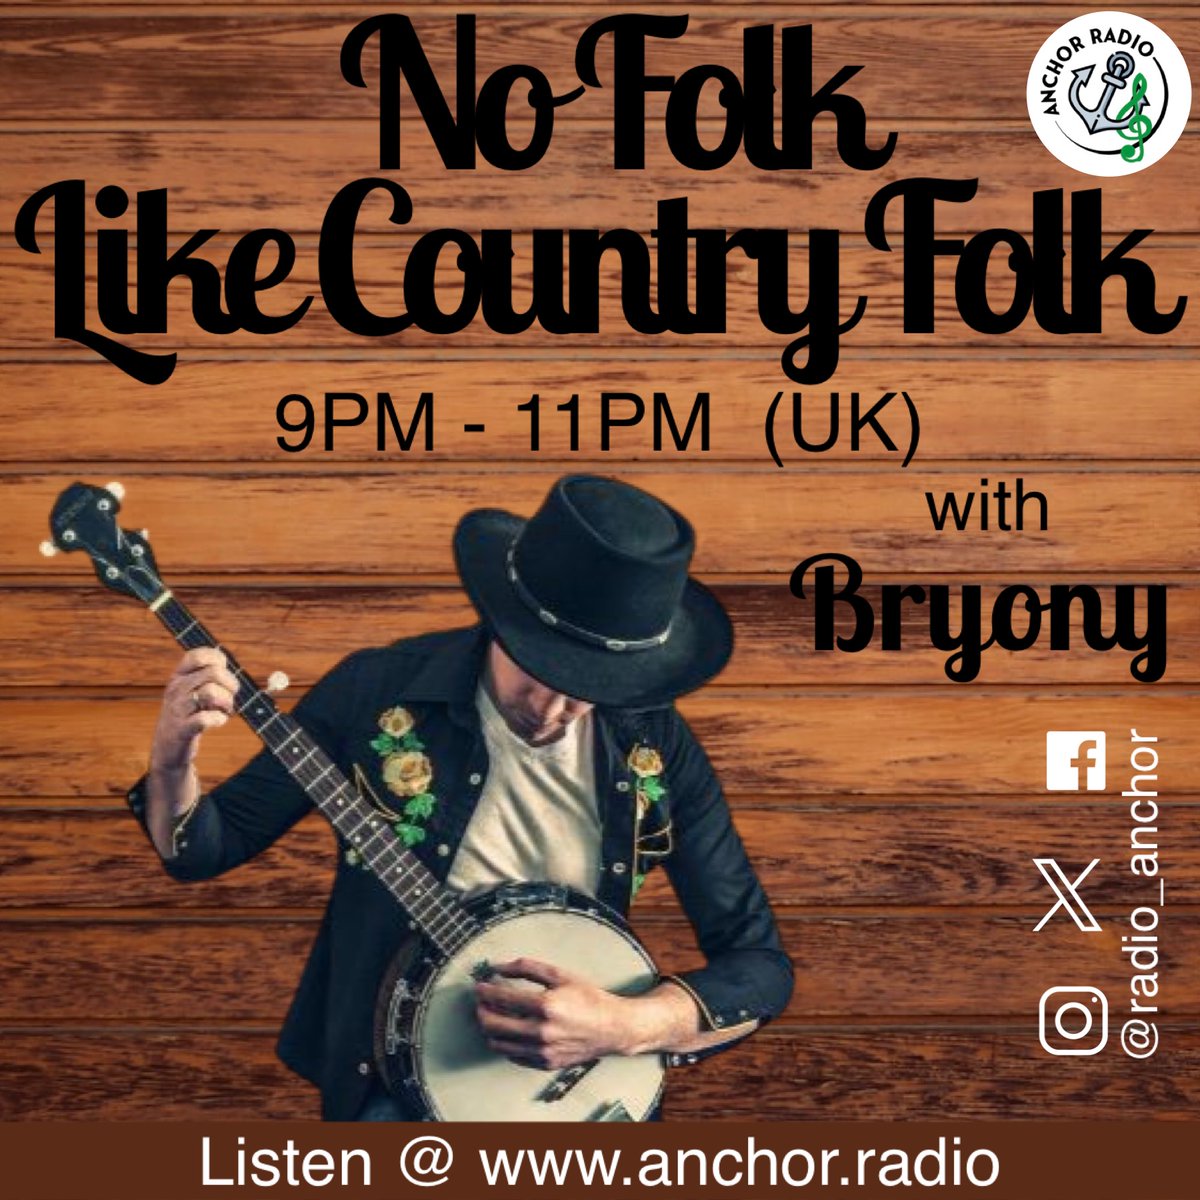 Up at 9 pm UK time, it’s time for no folk like Country Folk this week host is Bryony let her take you on a journey of love and break up and all things affairs of the heart, bringing you some oldies right up to new releases